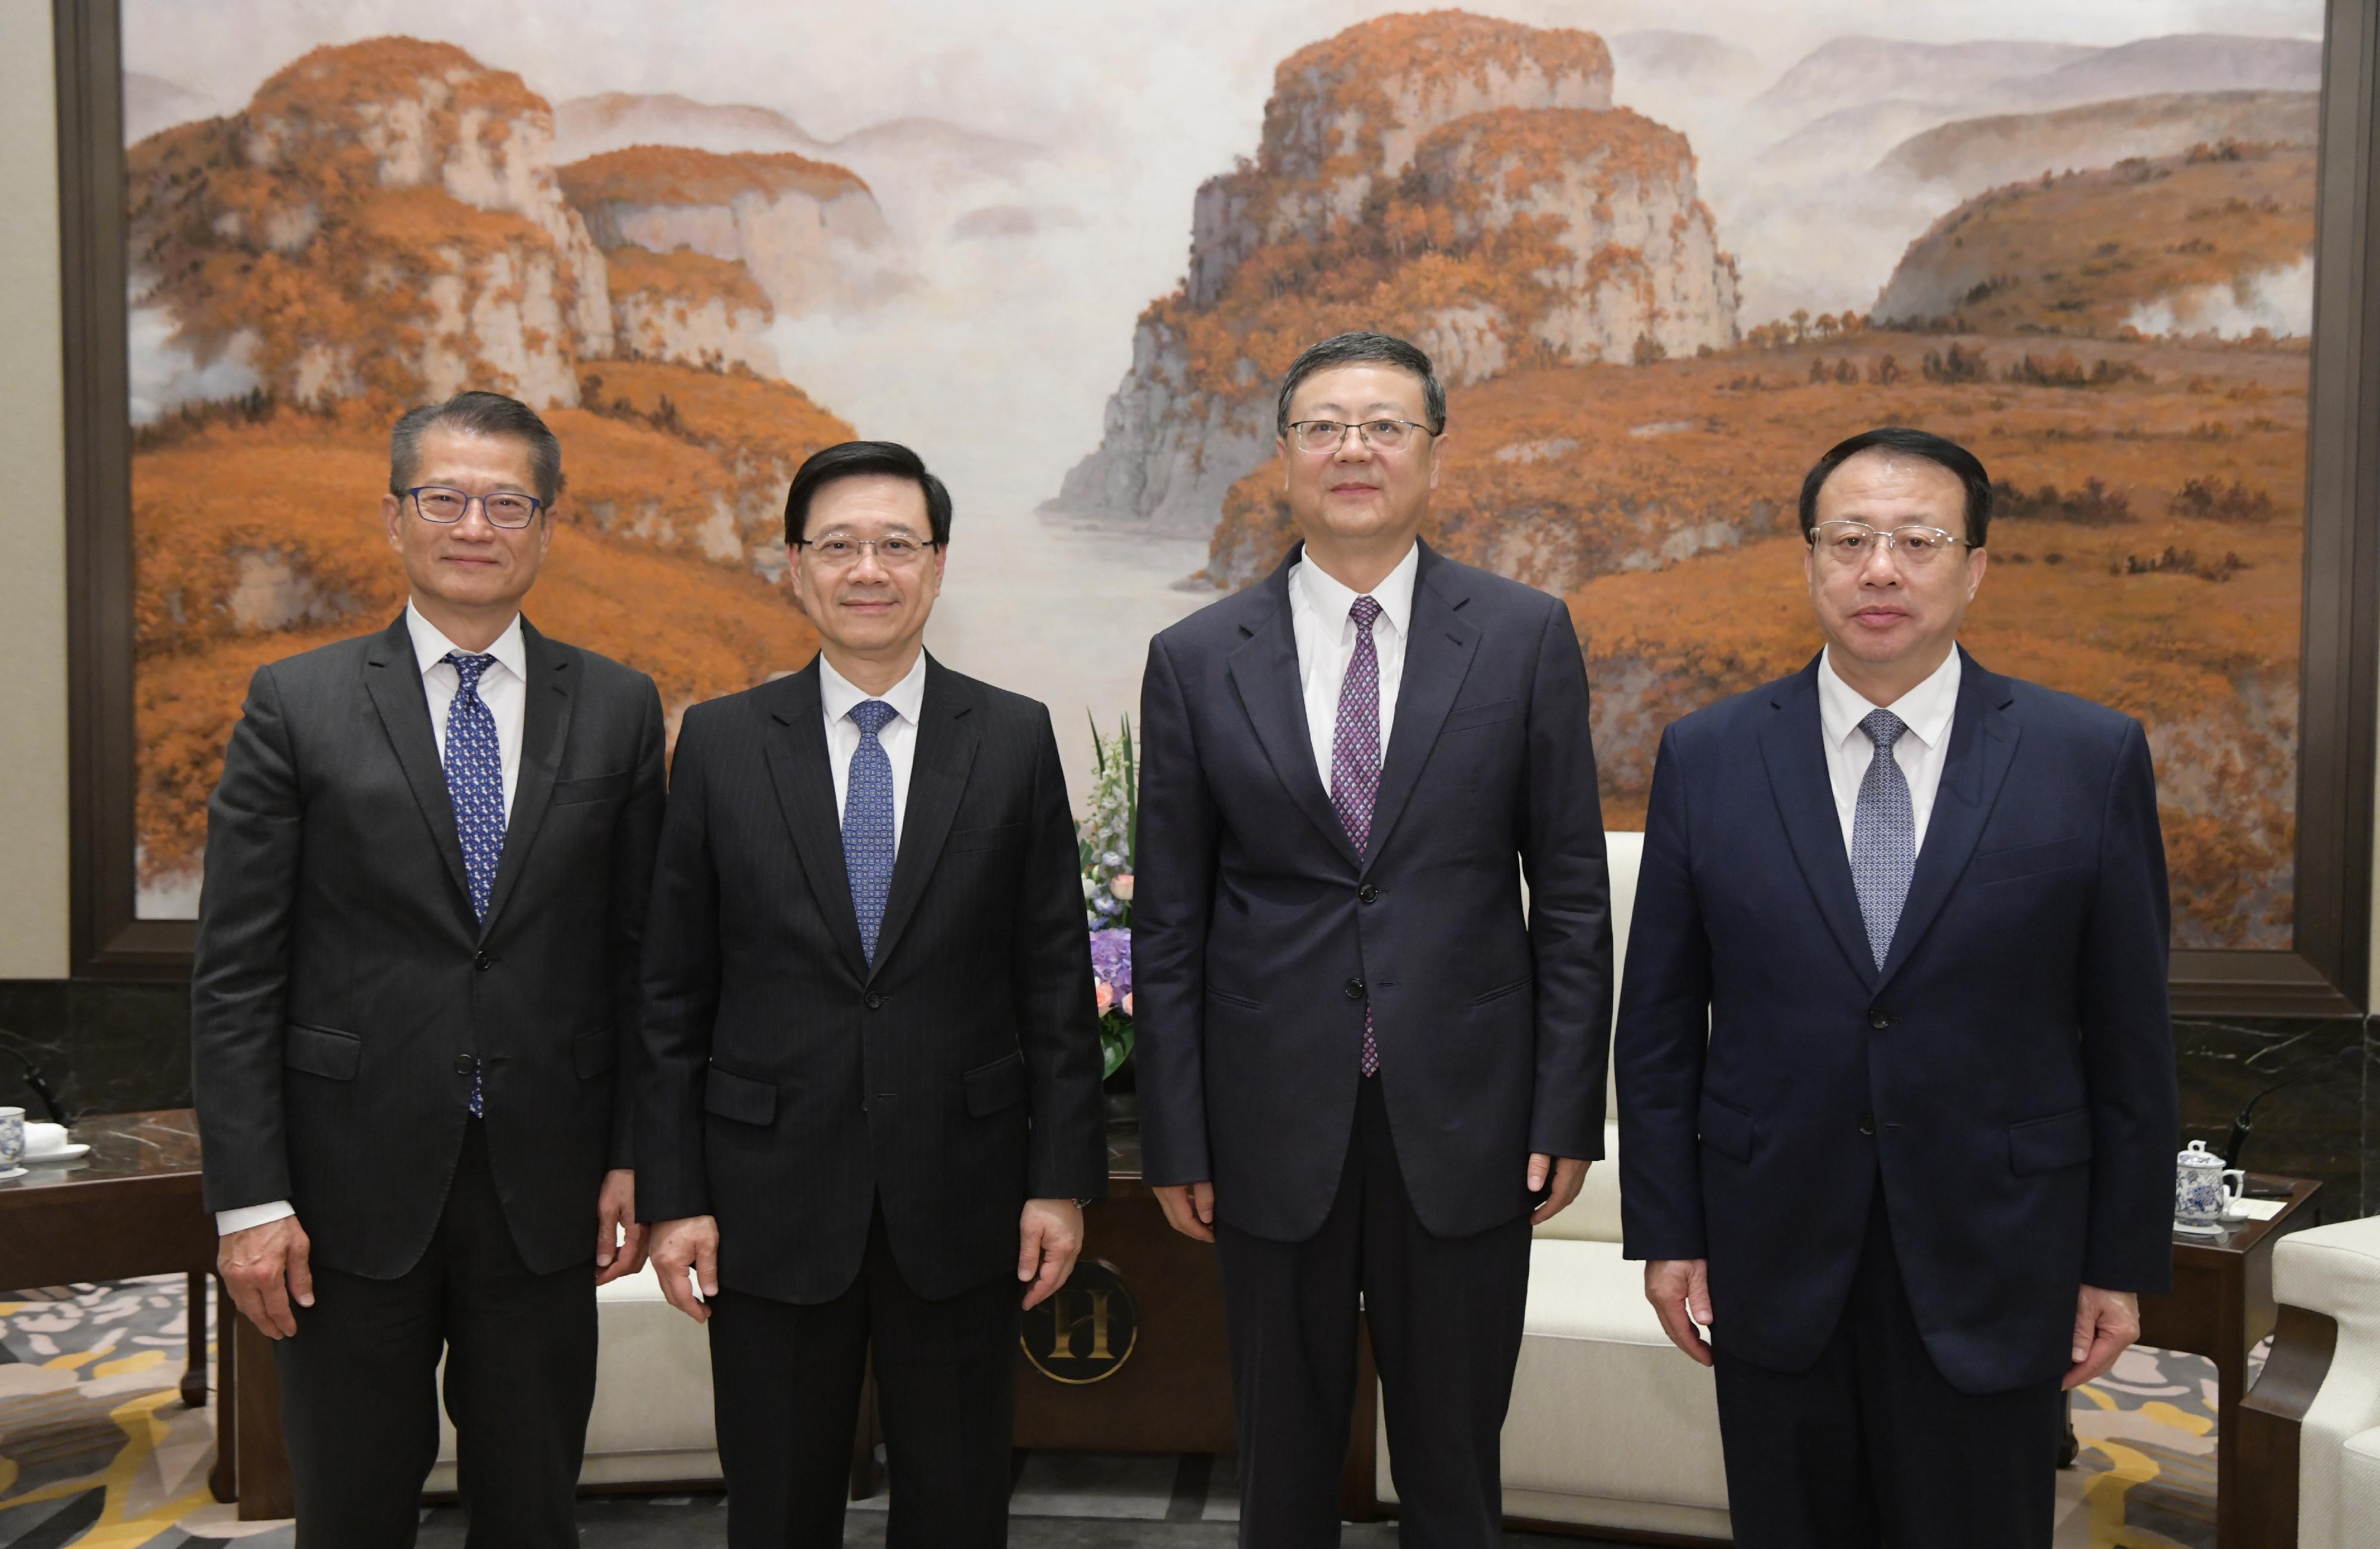 The Chief Executive, Mr John Lee, met with the Secretary of the CPC Shanghai Municipal Committee, Mr Chen Jining, and the Mayor of Shanghai, Mr Gong Zheng, in Shanghai today (November 4). Photo shows (from left) the Financial Secretary, Mr Paul Chan; Mr Lee; Mr Chen; and Mr Gong, in a group photo after the meeting. 